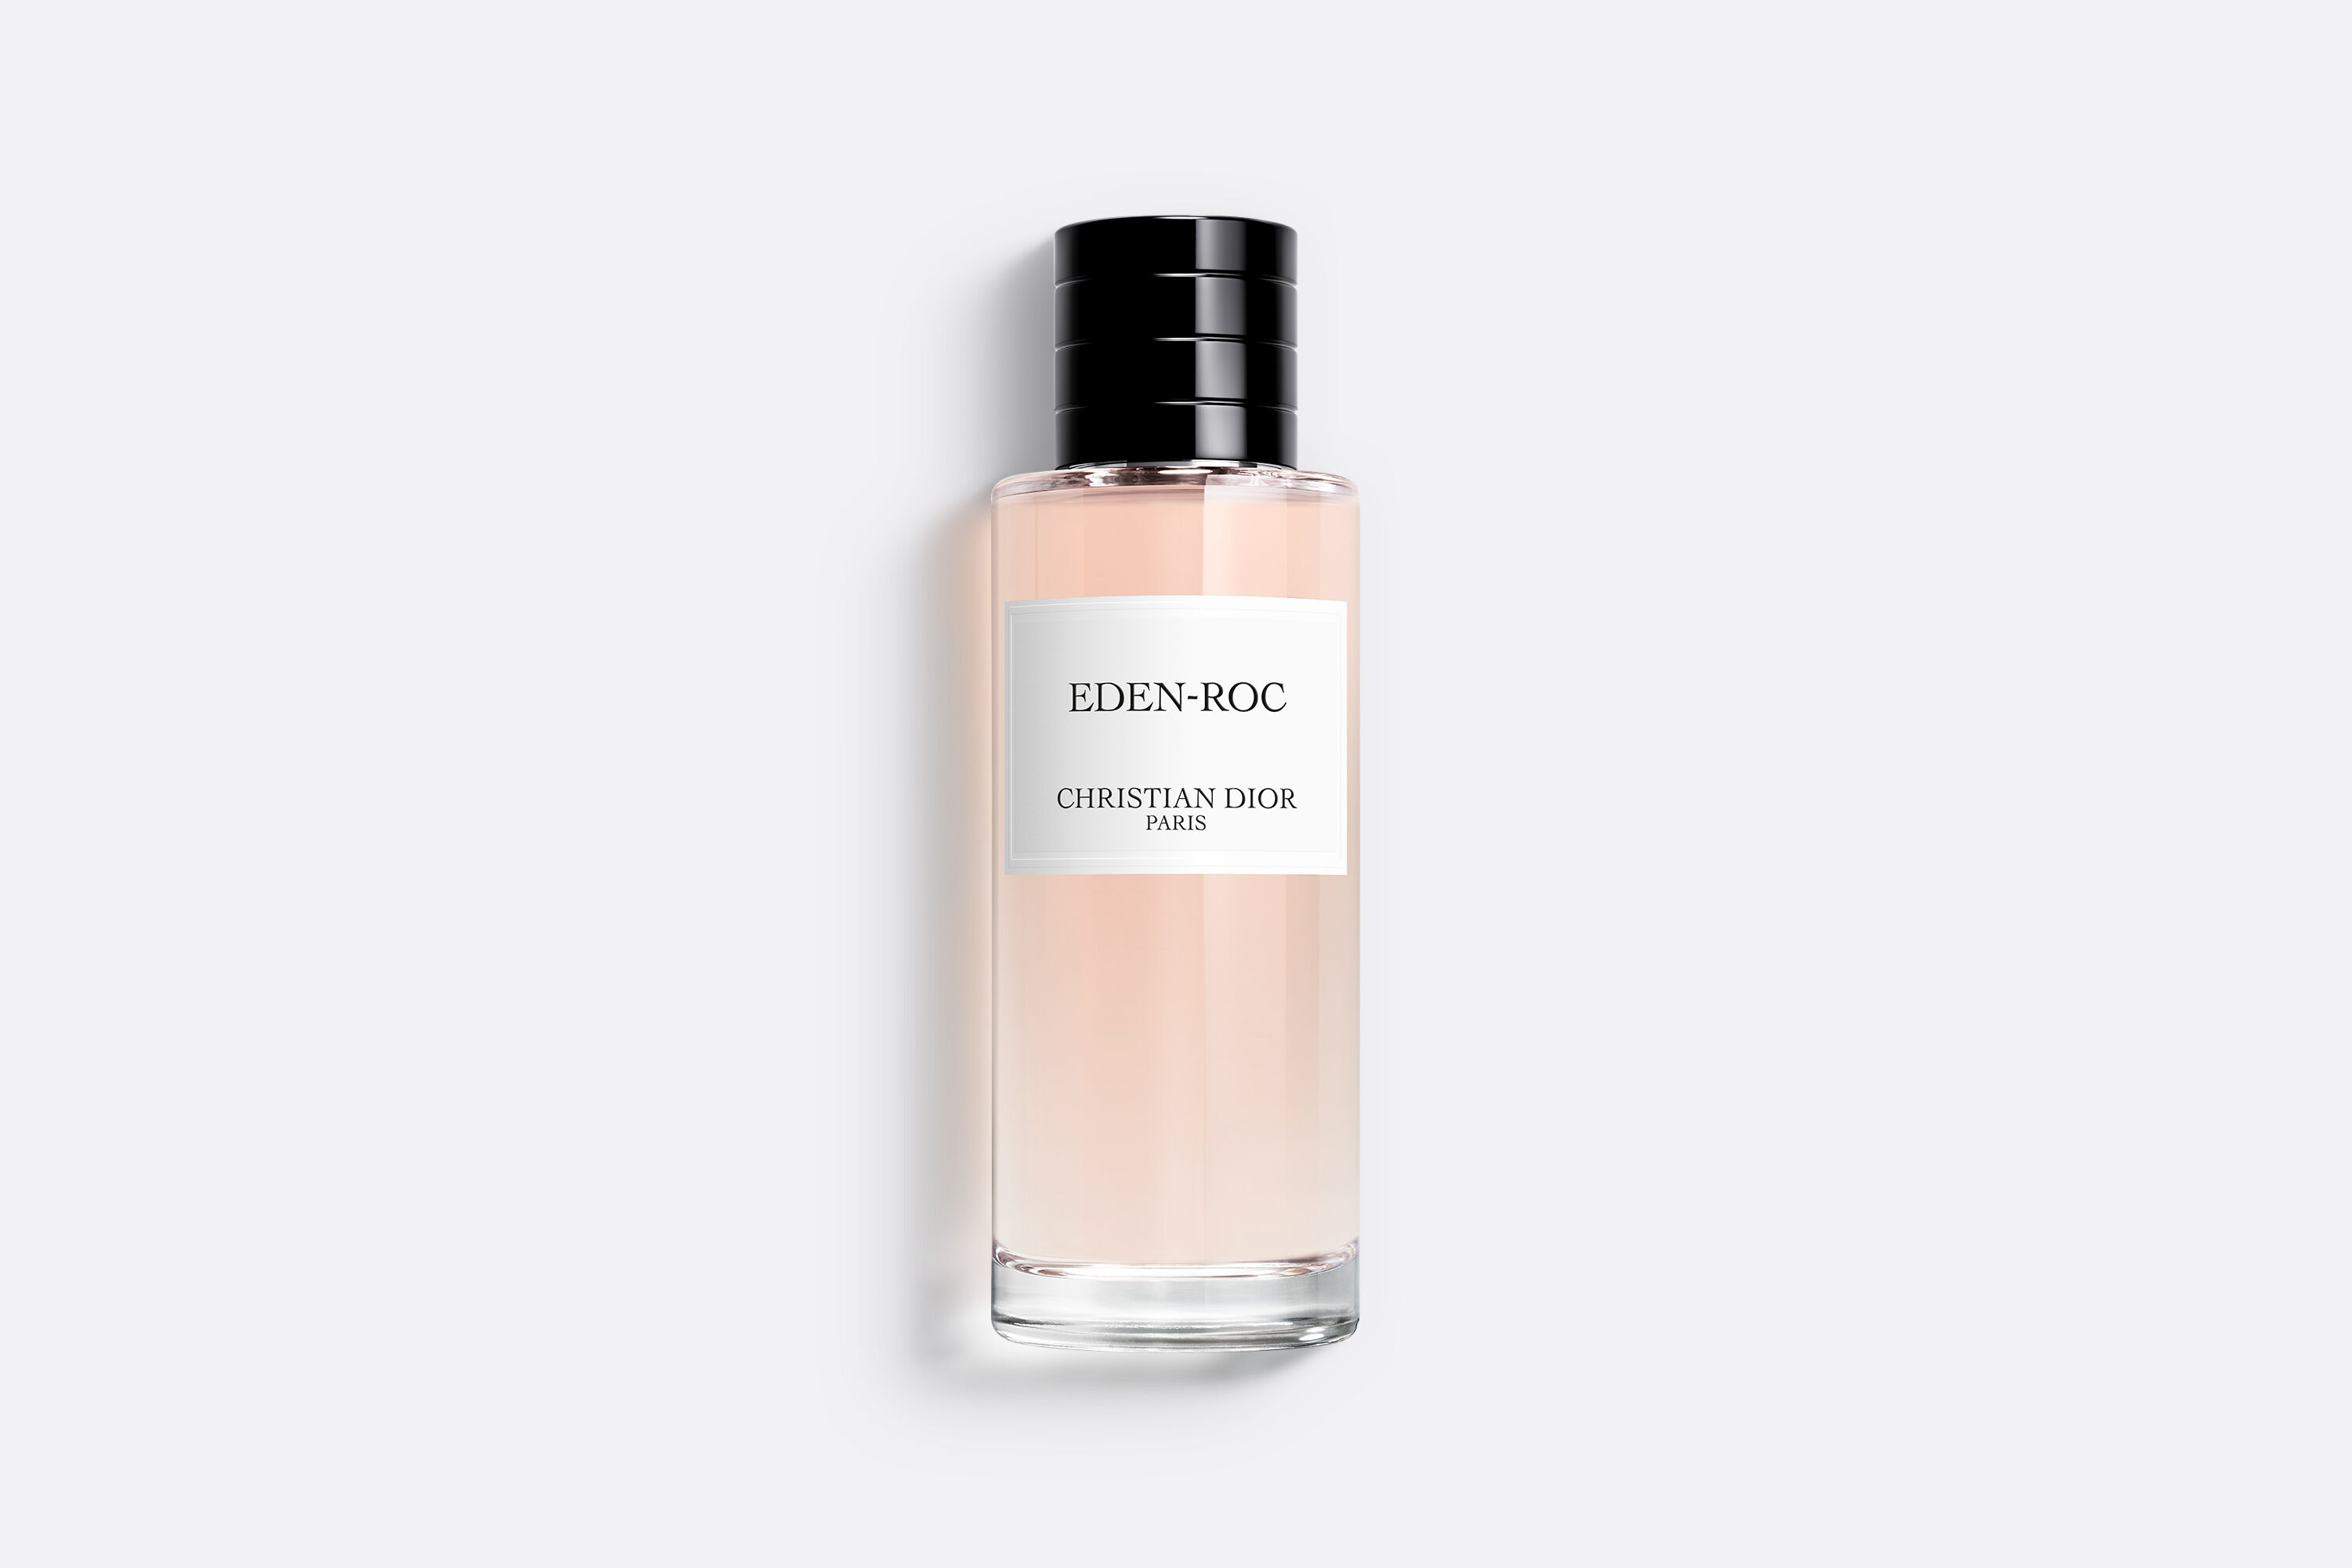 Dior announces limited edition fragrance collection for summer  Dioriviera   The Glass Magazine